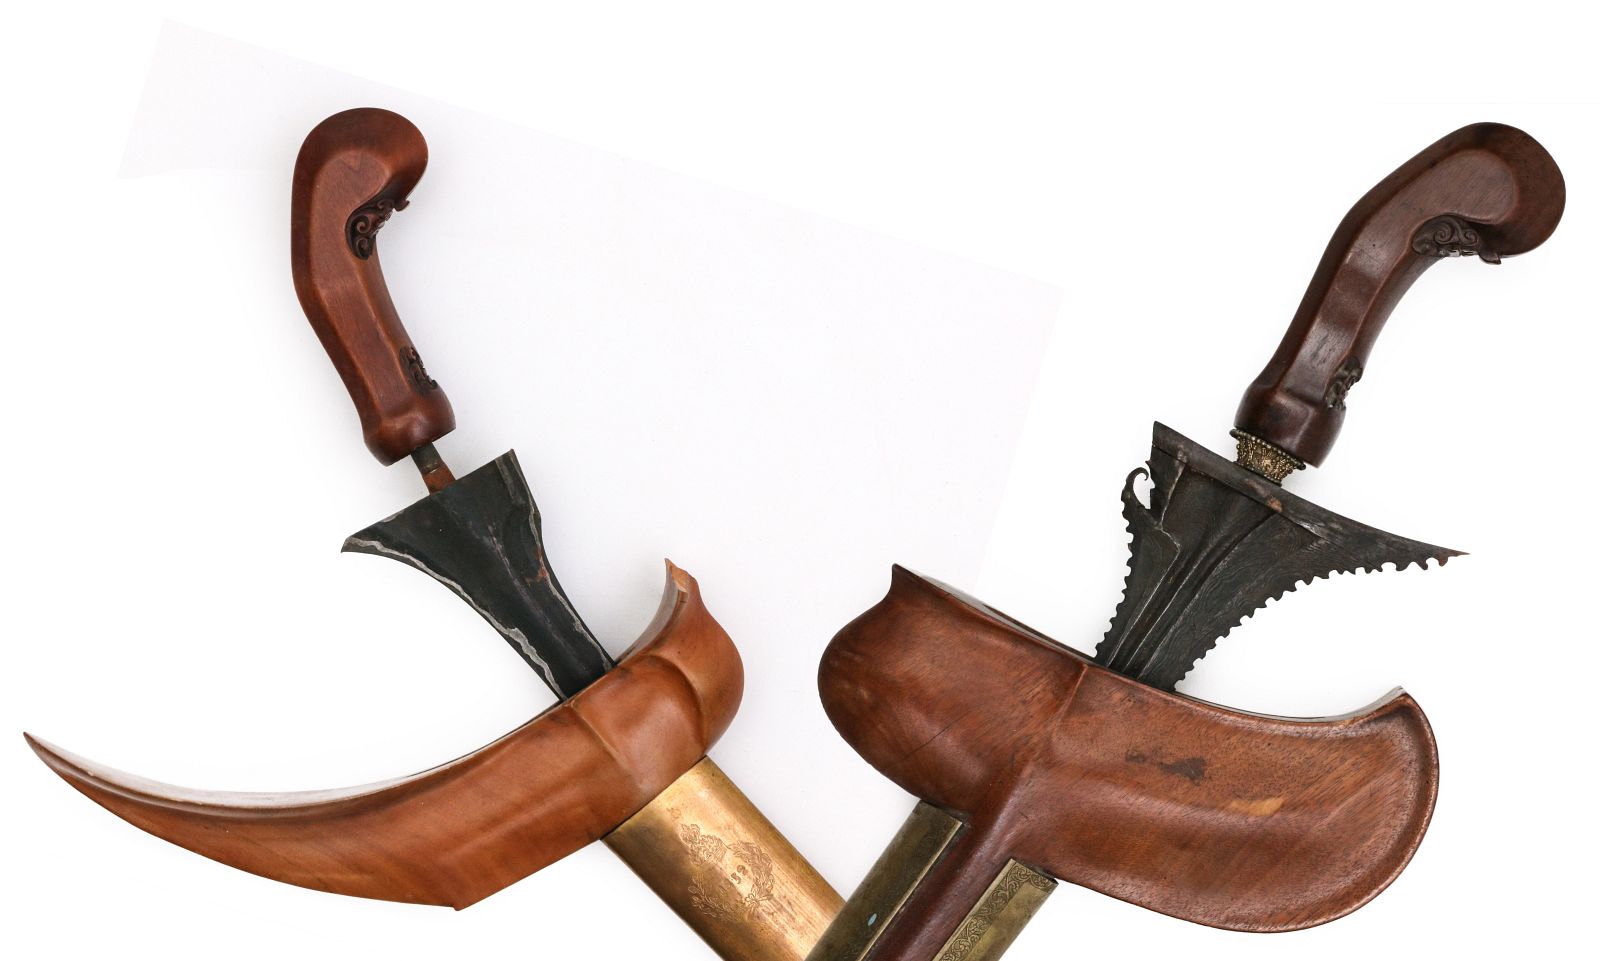 TWO DAMASCUS BLADE KRIS DAGGERS WITH SCABBARDS